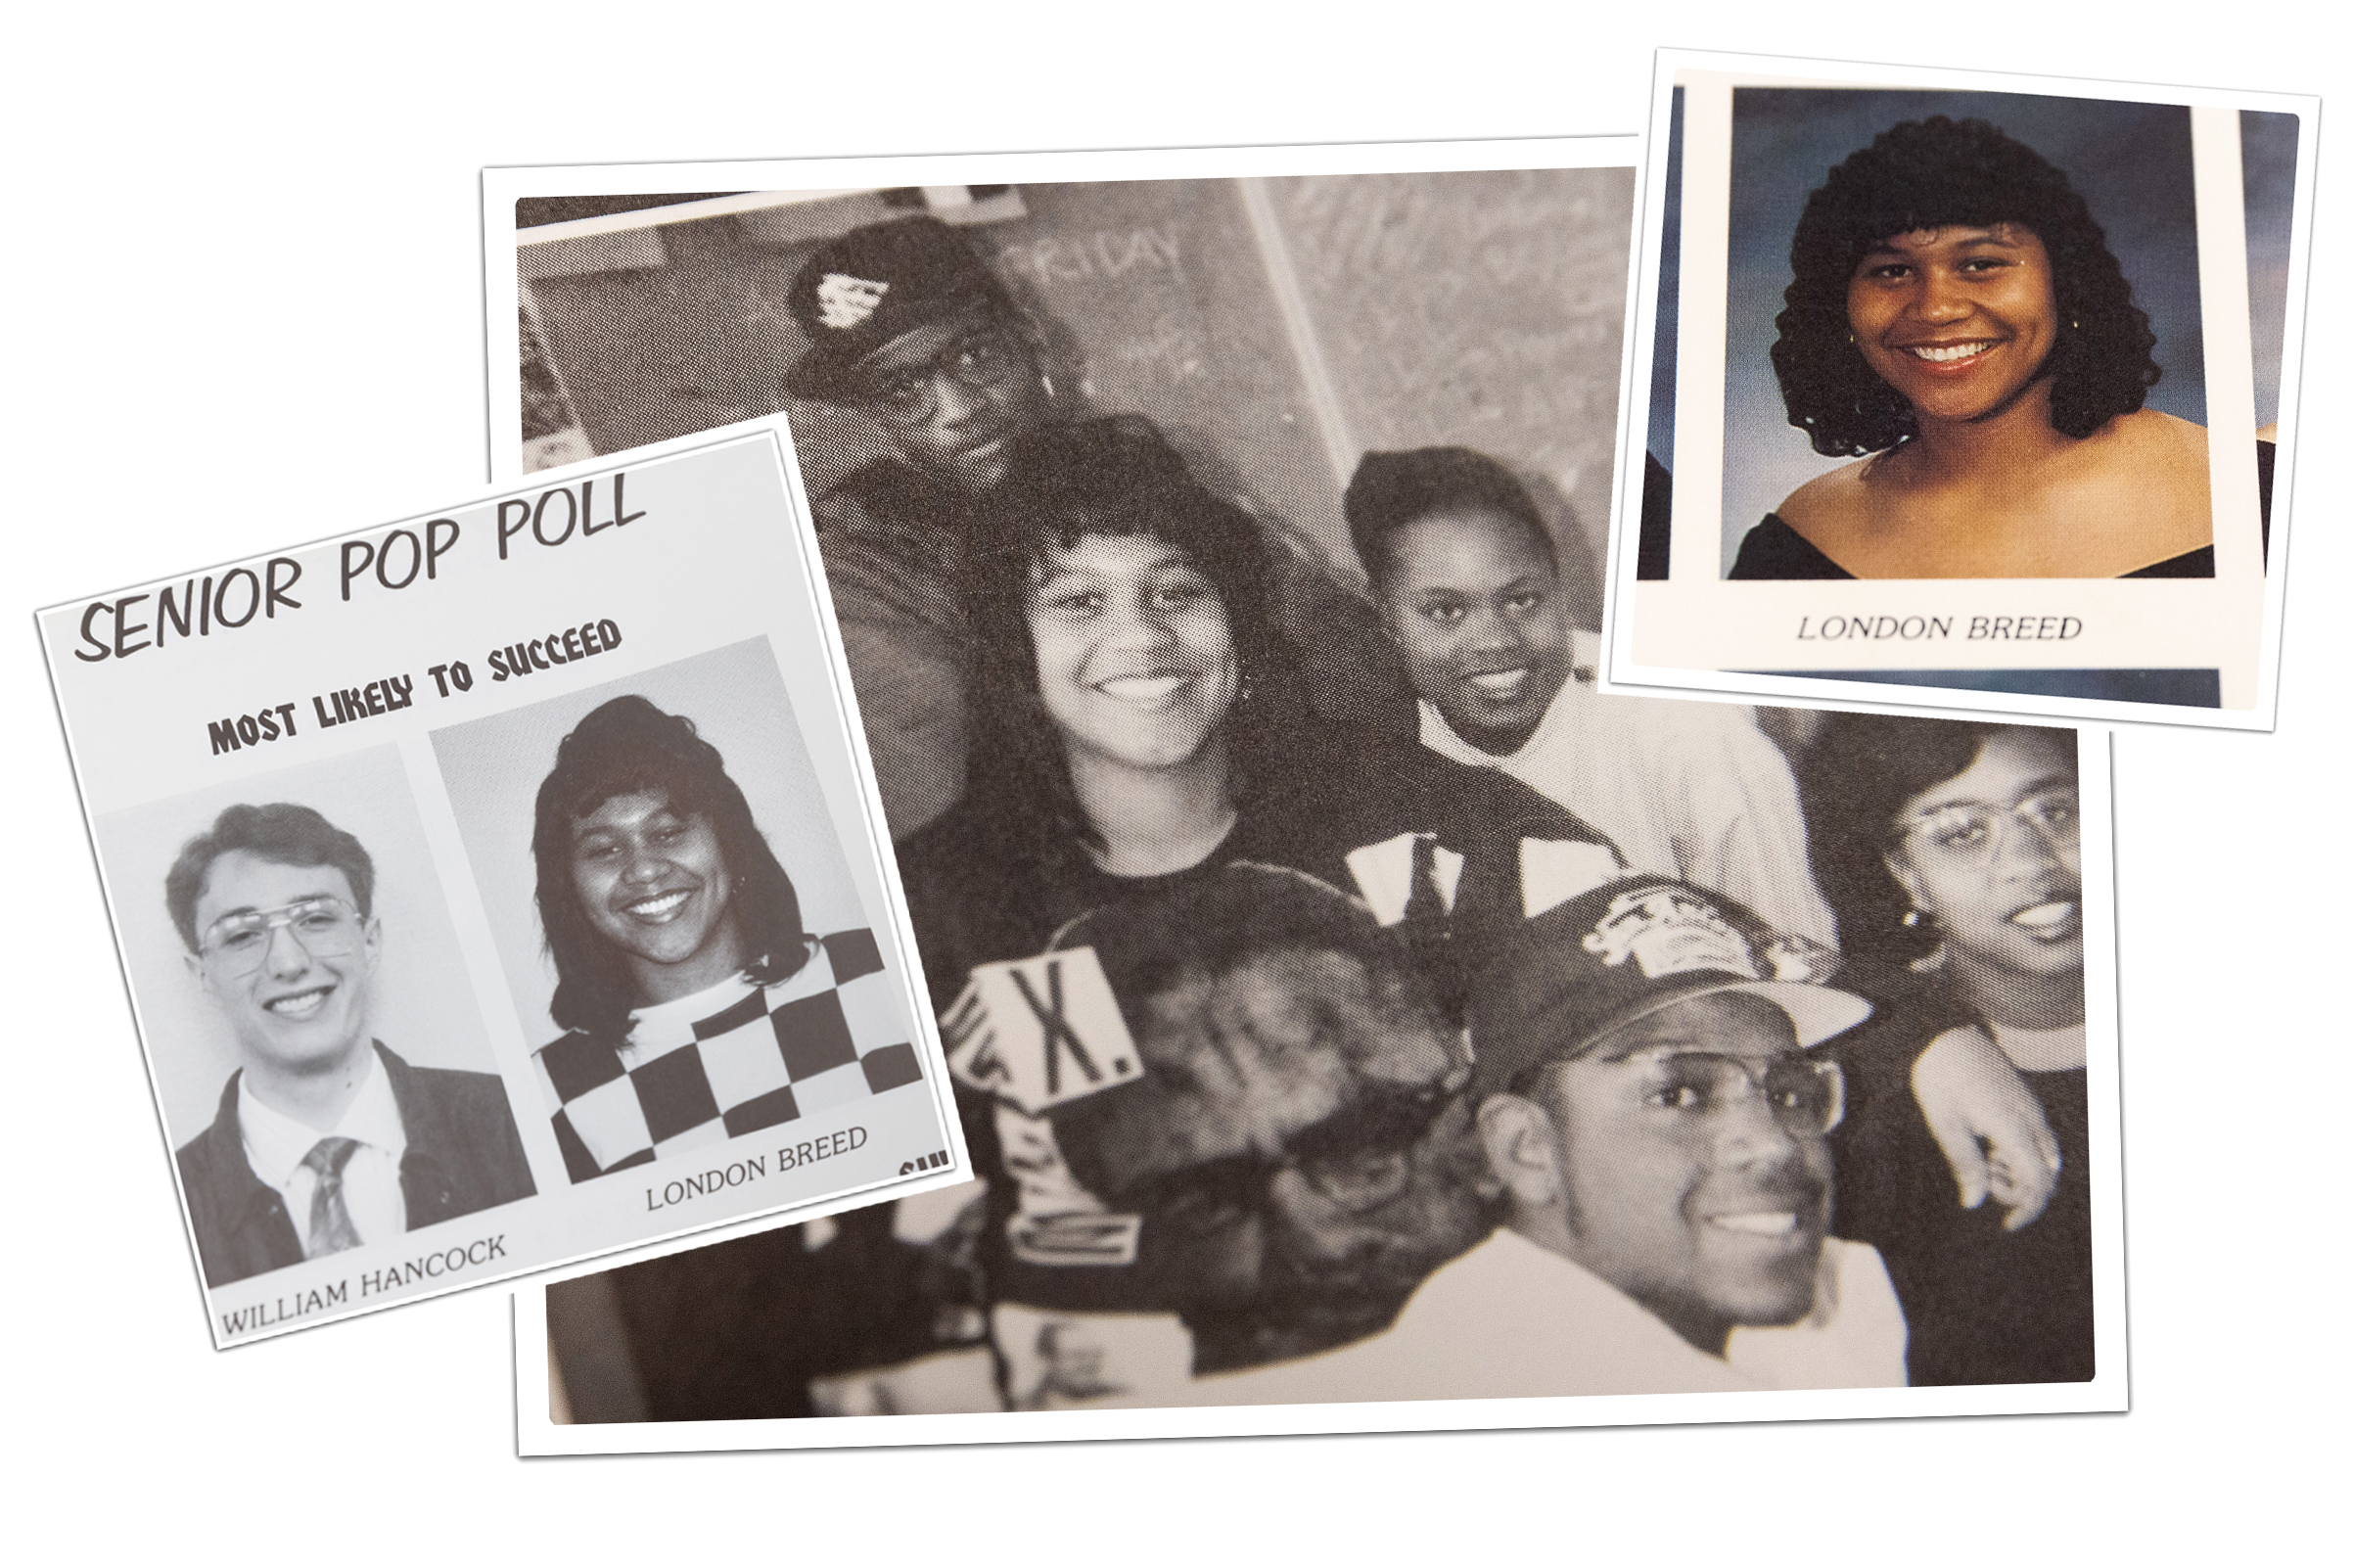 A composite image shows photos of London Breed in her senior year in the 1992 Galileo High School yearbook.